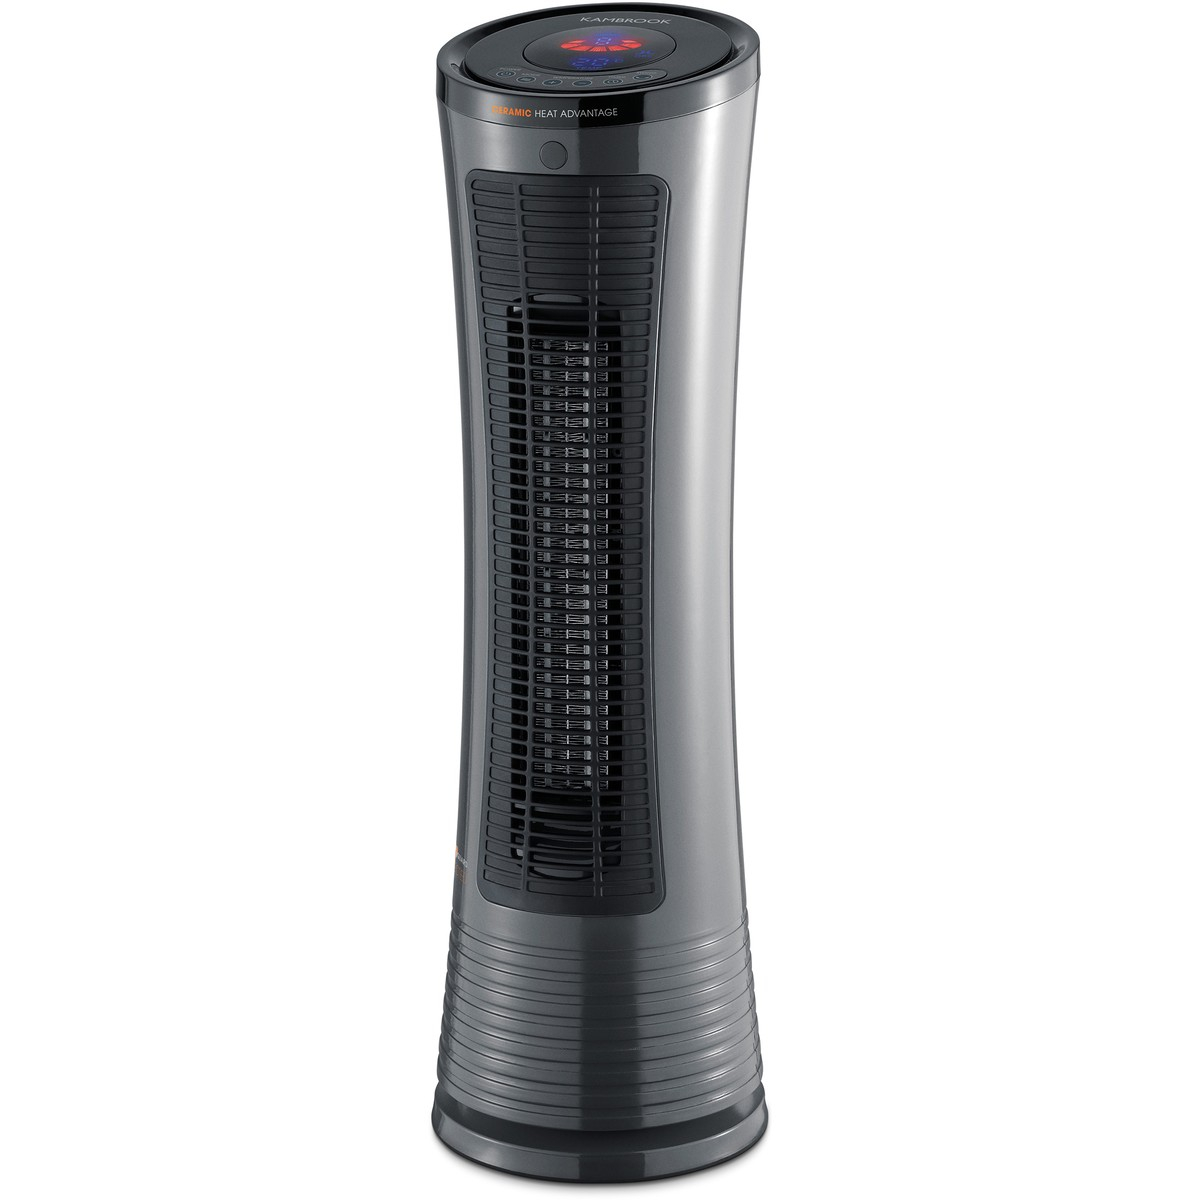 Kambrook Ceramic Tower Heater 2000w Kce240 with regard to measurements 1200 X 1200